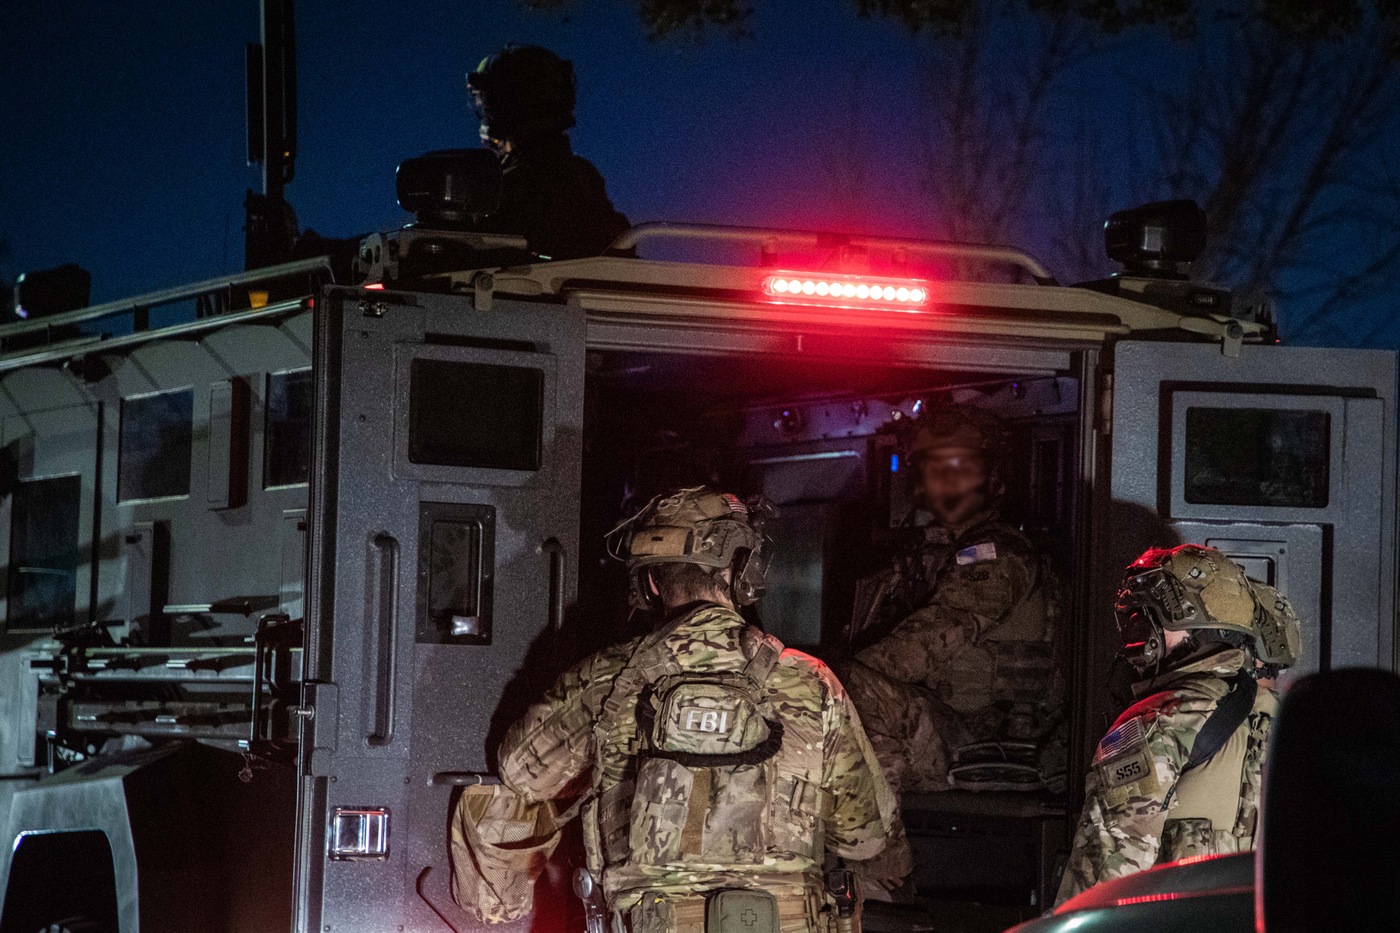 FBI SWAT officers load into a truck after the operation concluded.